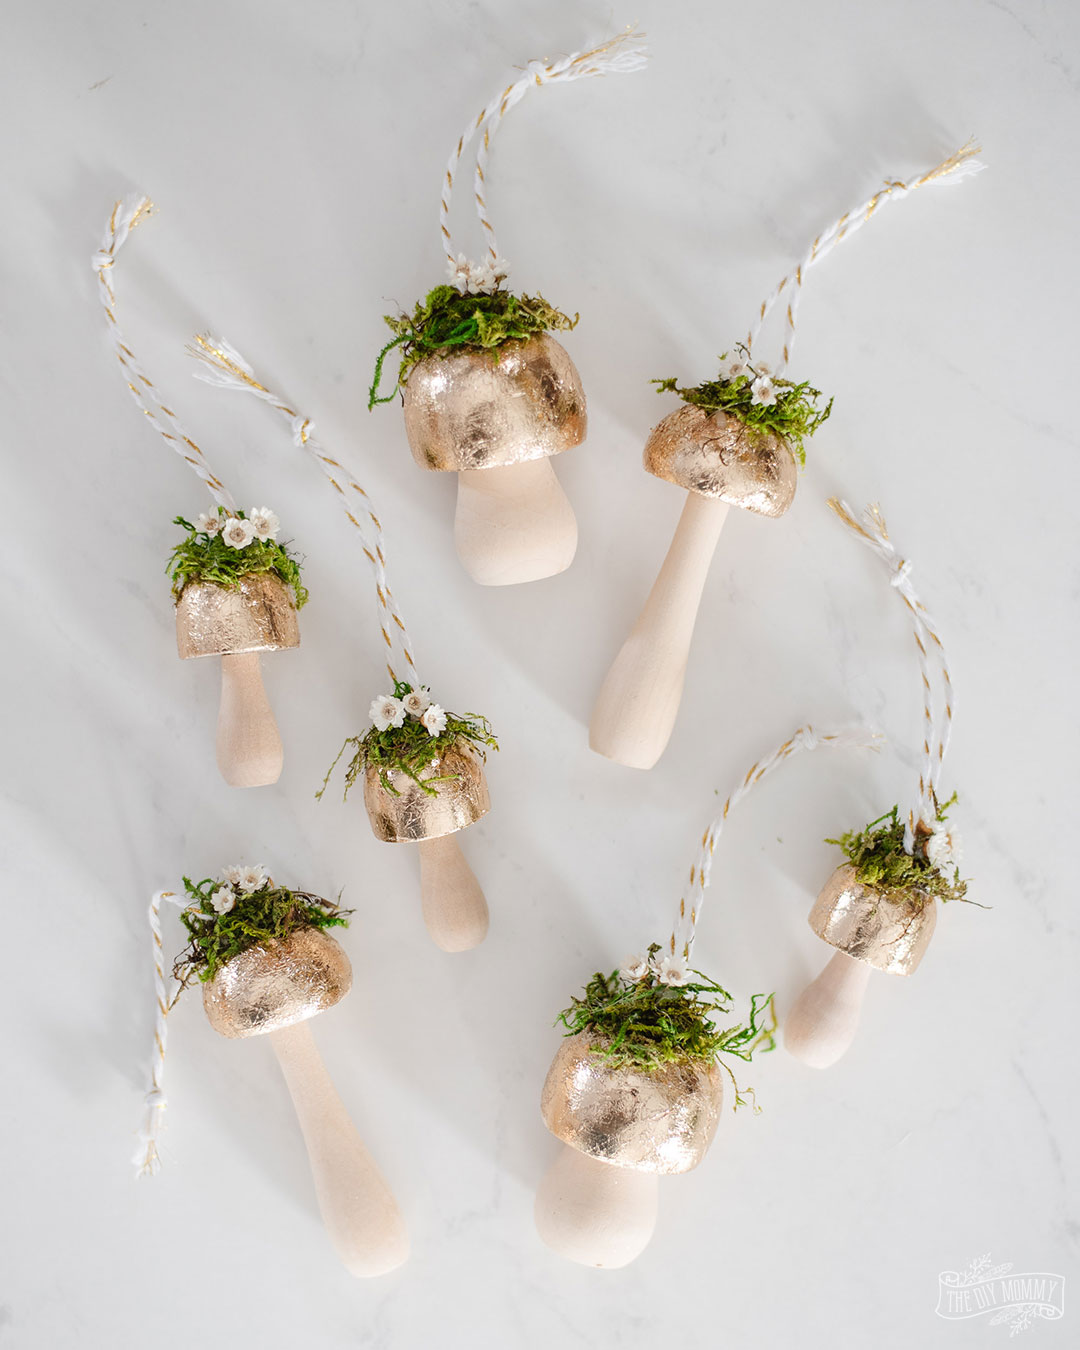 DIY Christmas Ornament – Cottagecore mushrooms for your tree!